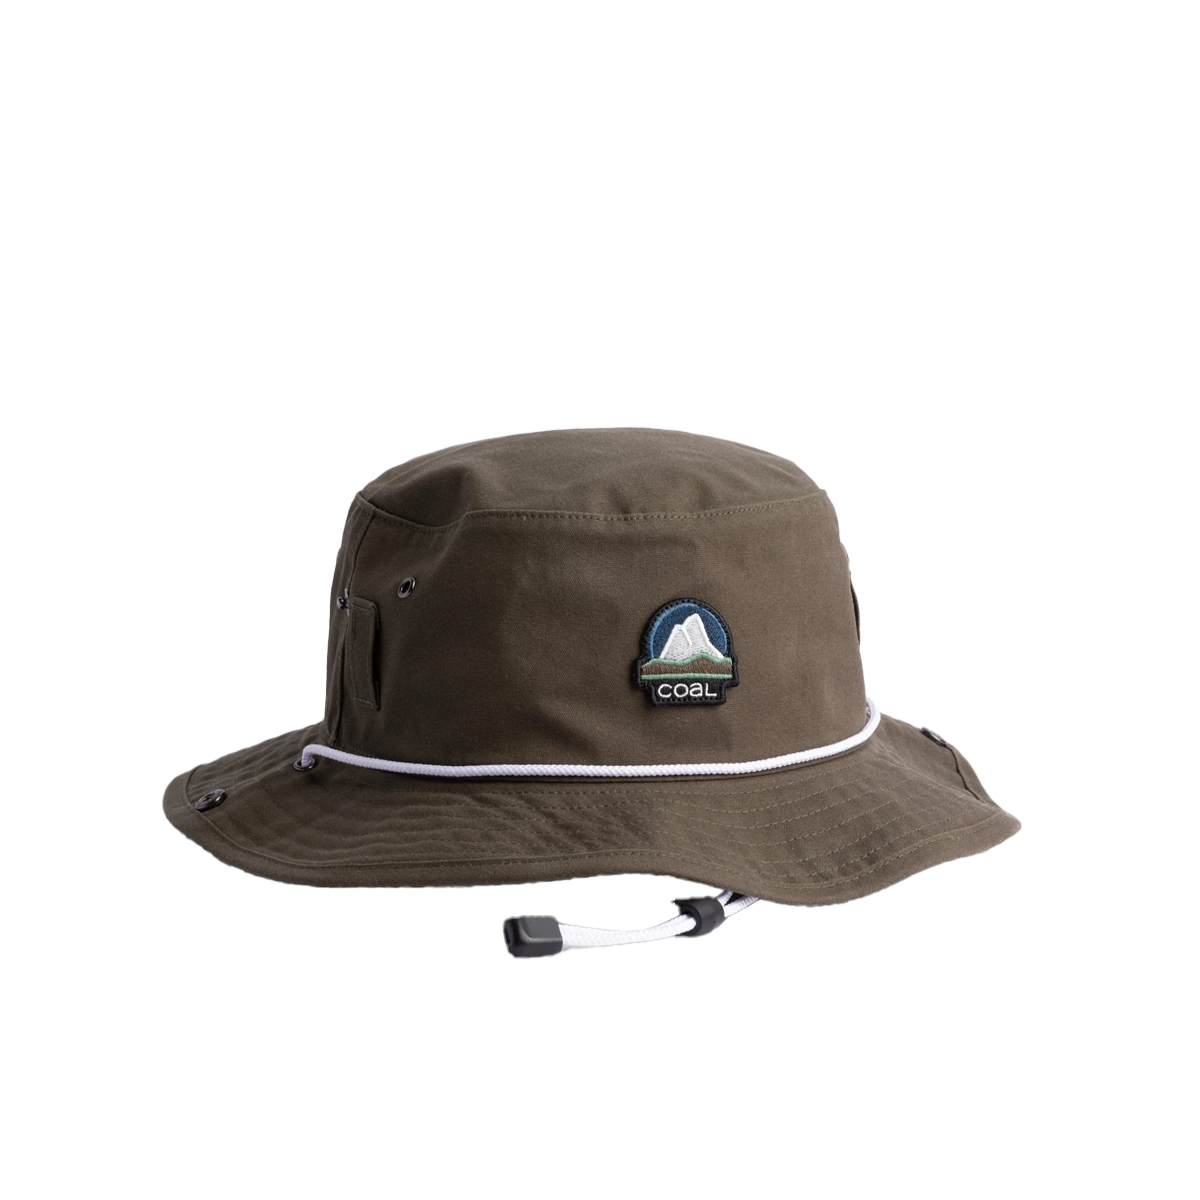 Coal Seymour Waxed Canvas Boonie Hat - Assorted Colors